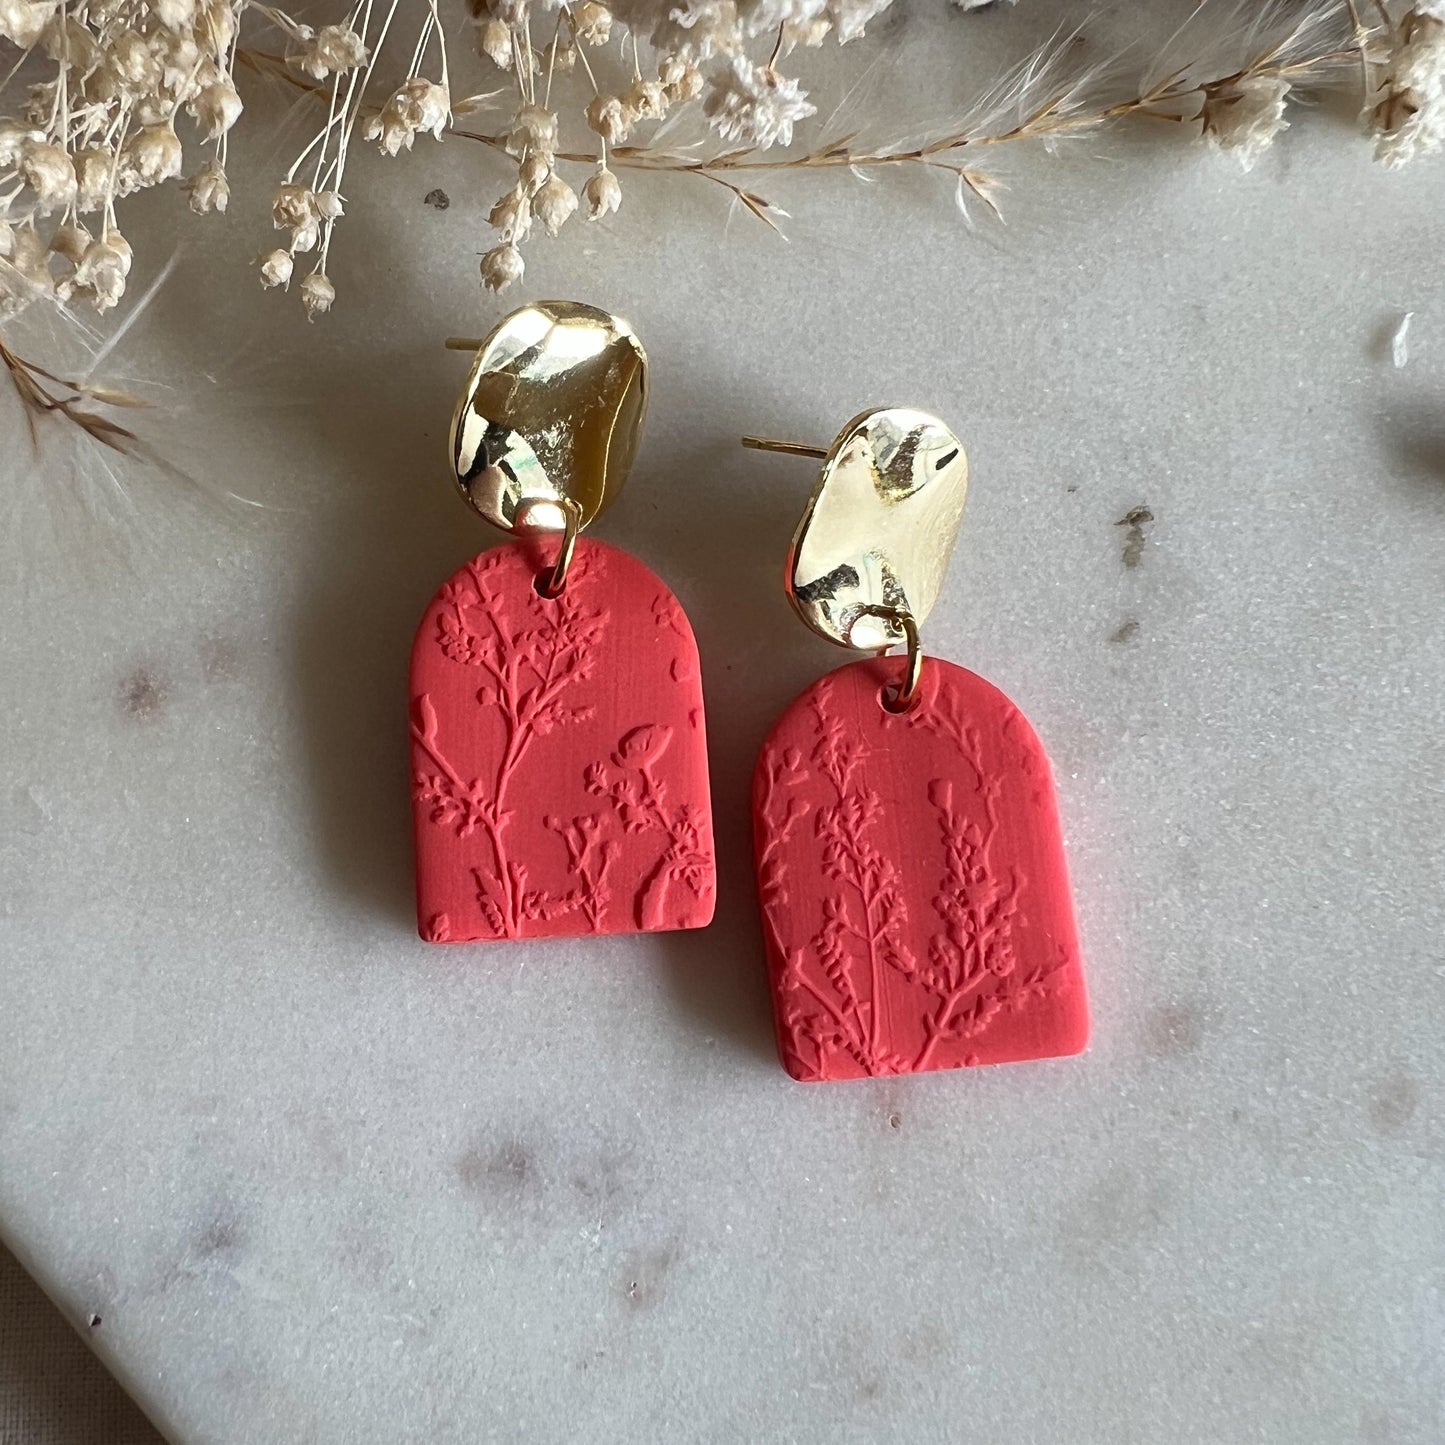 DARAS | statement circle stud drop earring with blossom textured rounded arch in bright coral red